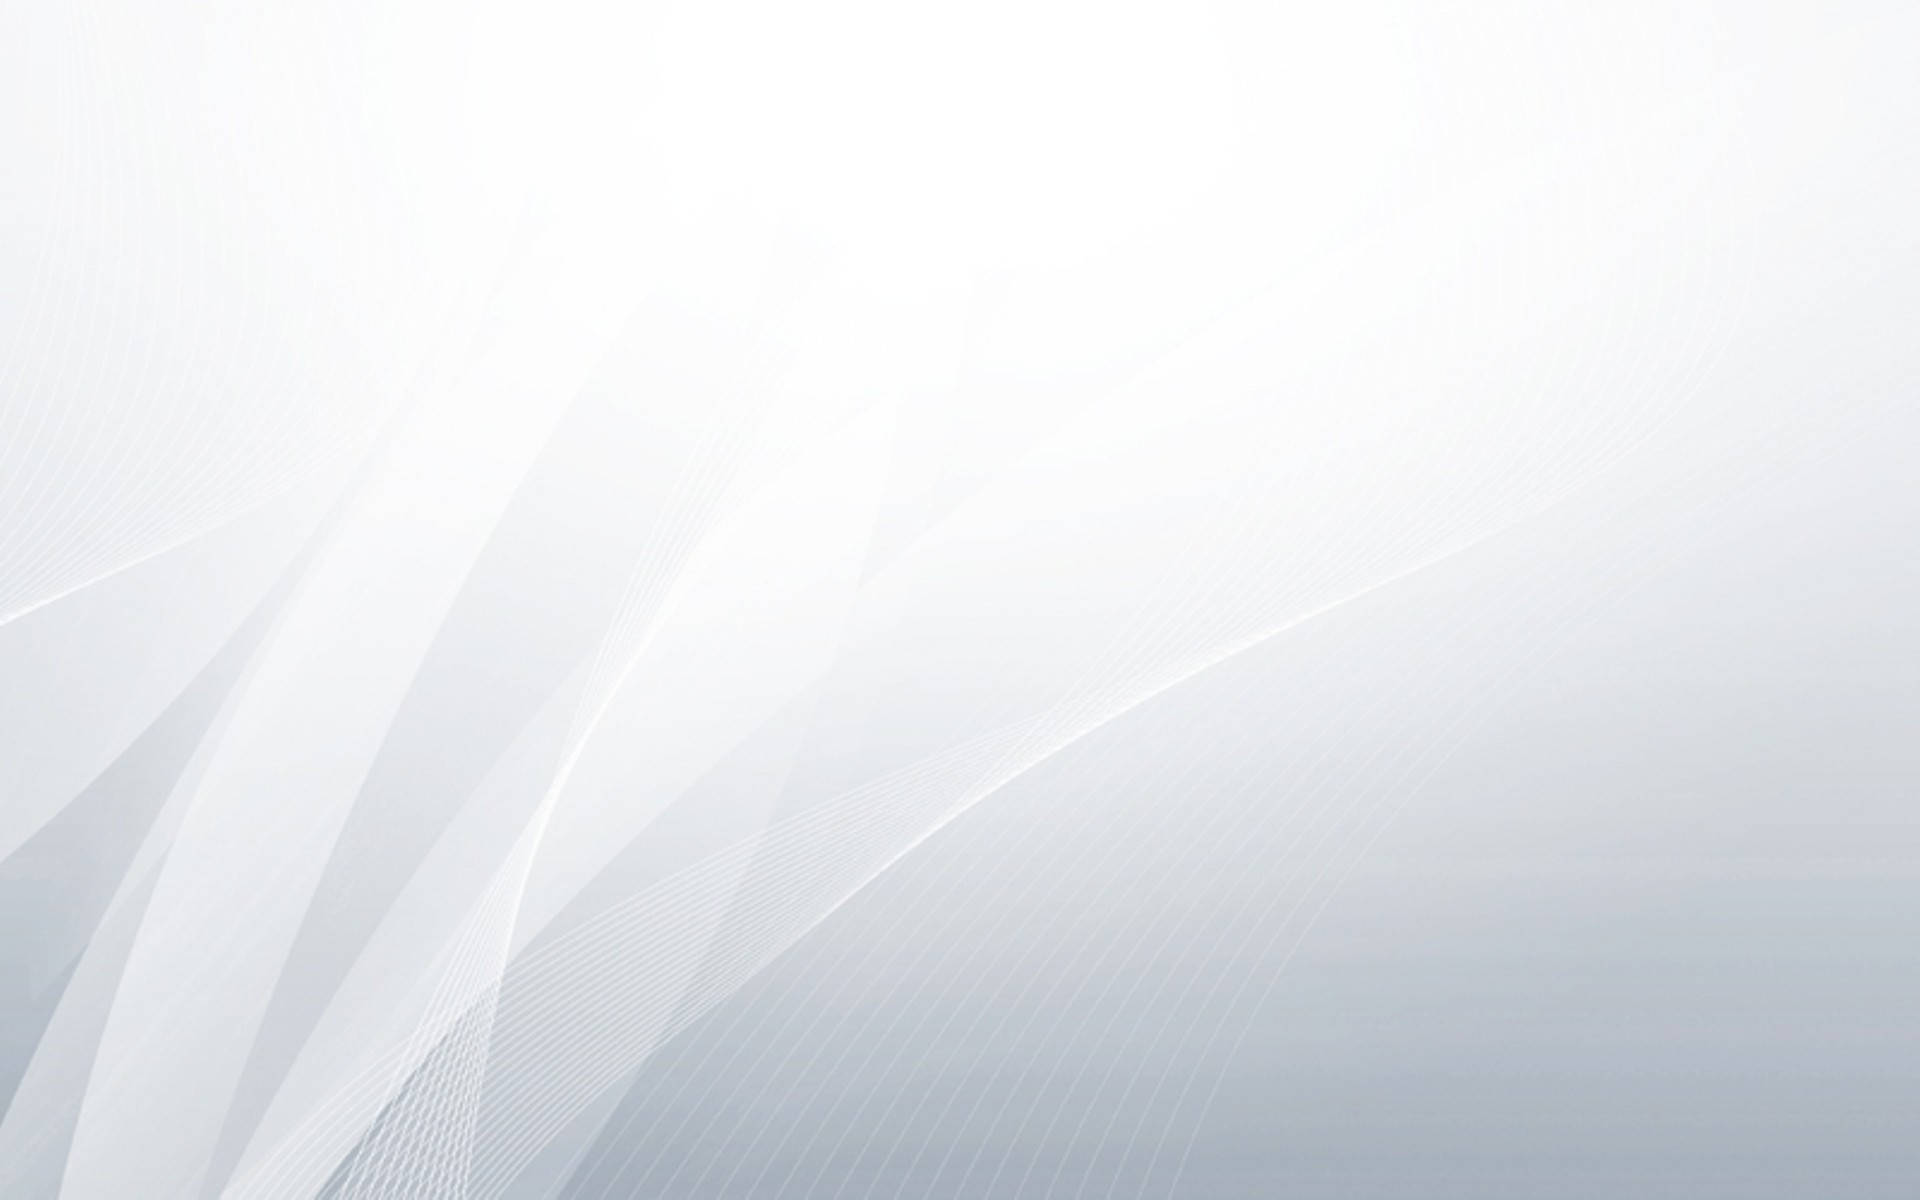 White Hd Abstract Curves